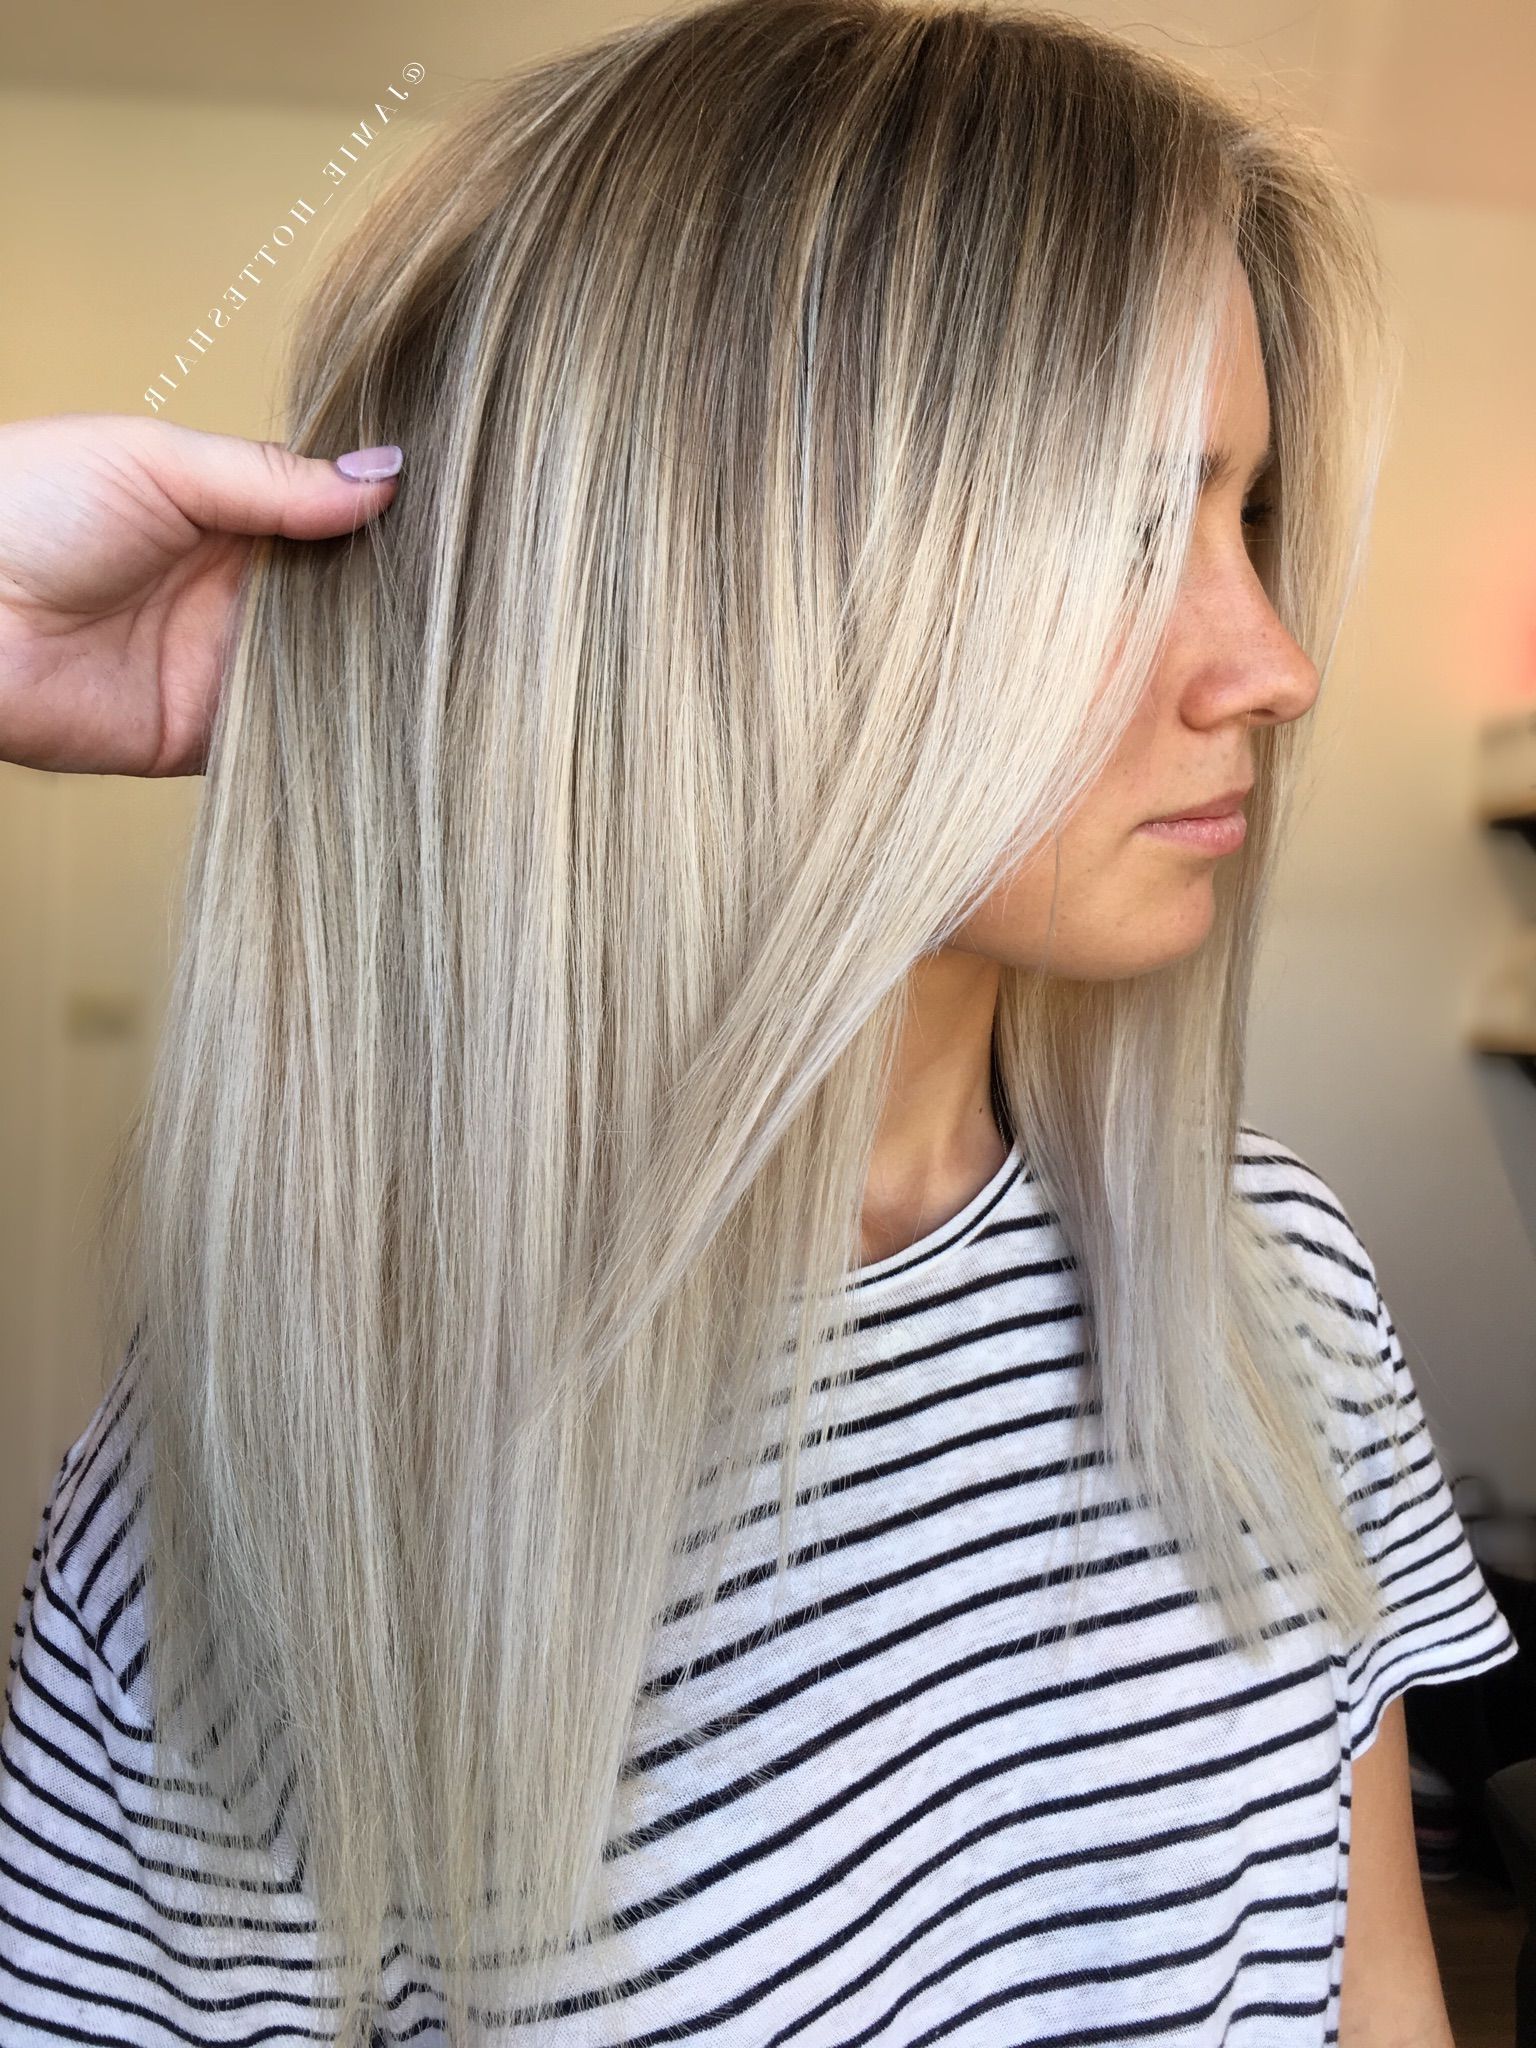 Best And Newest White And Dirty Blonde Combo Hairstyles Pertaining To Pinsophie Neubert On Hair In  (View 16 of 20)